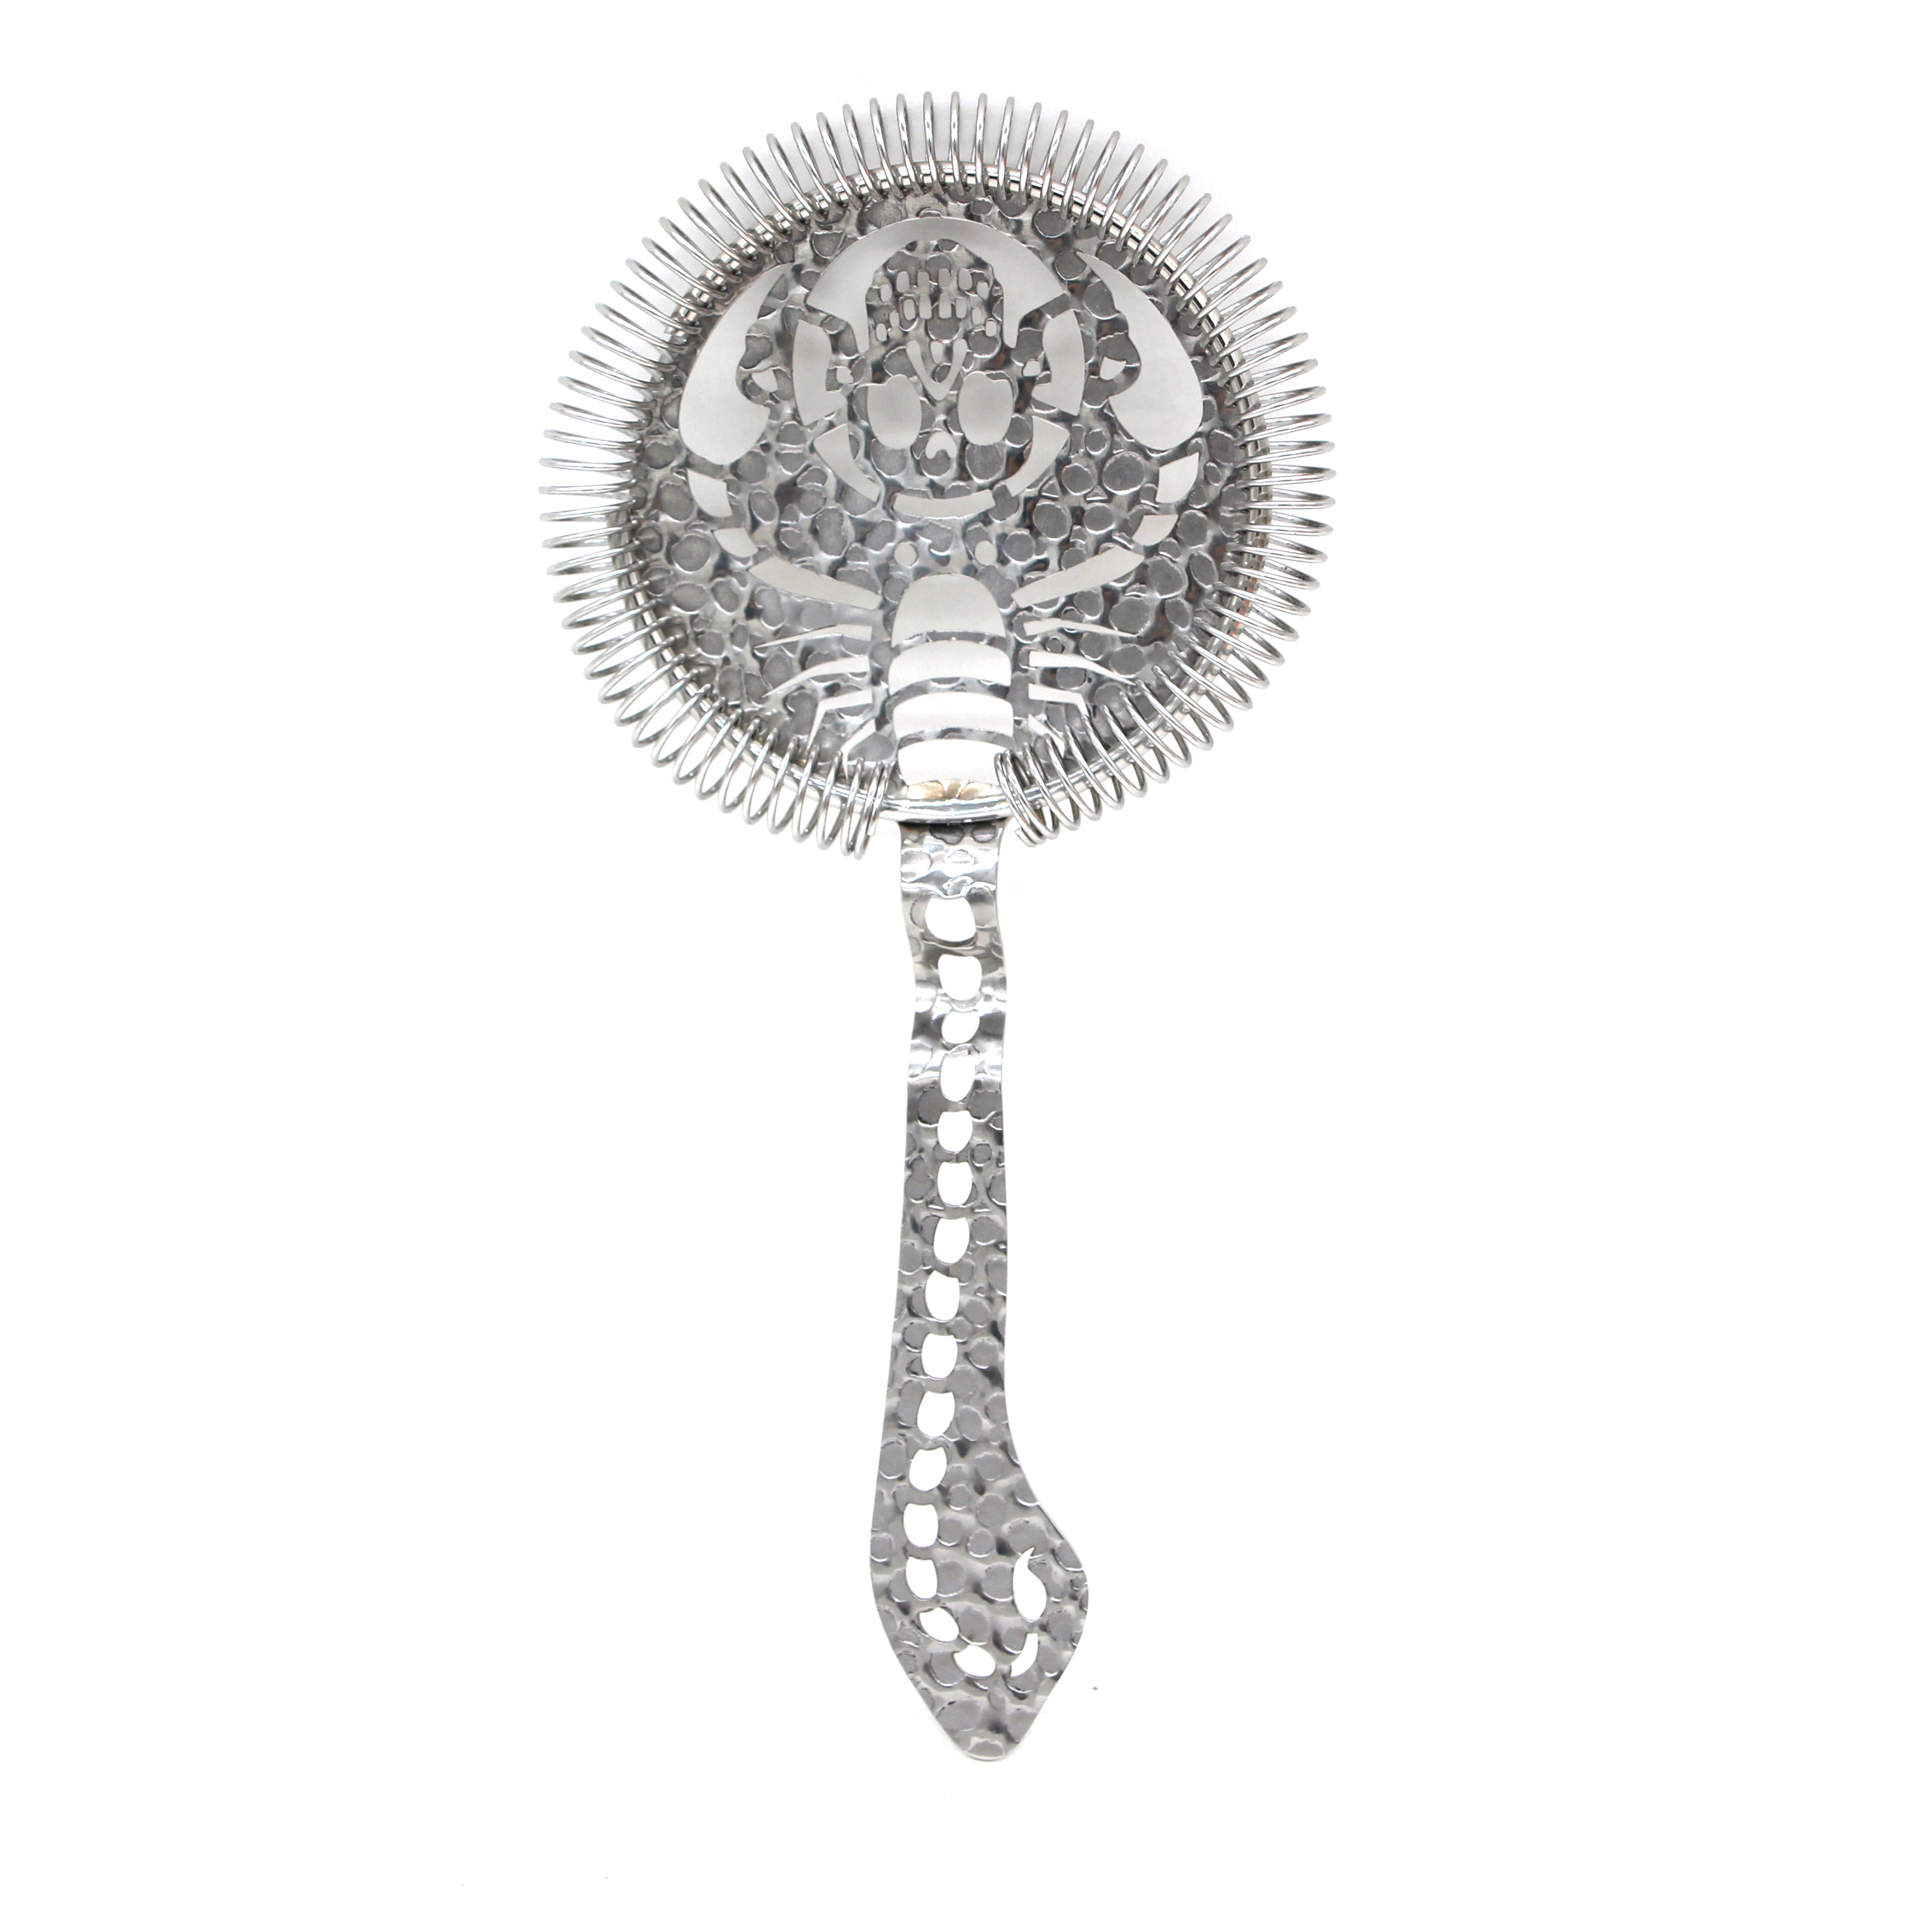 Stainless Steel Scorpion Cocktail Strainer With Raindrop Pattern Featured Image